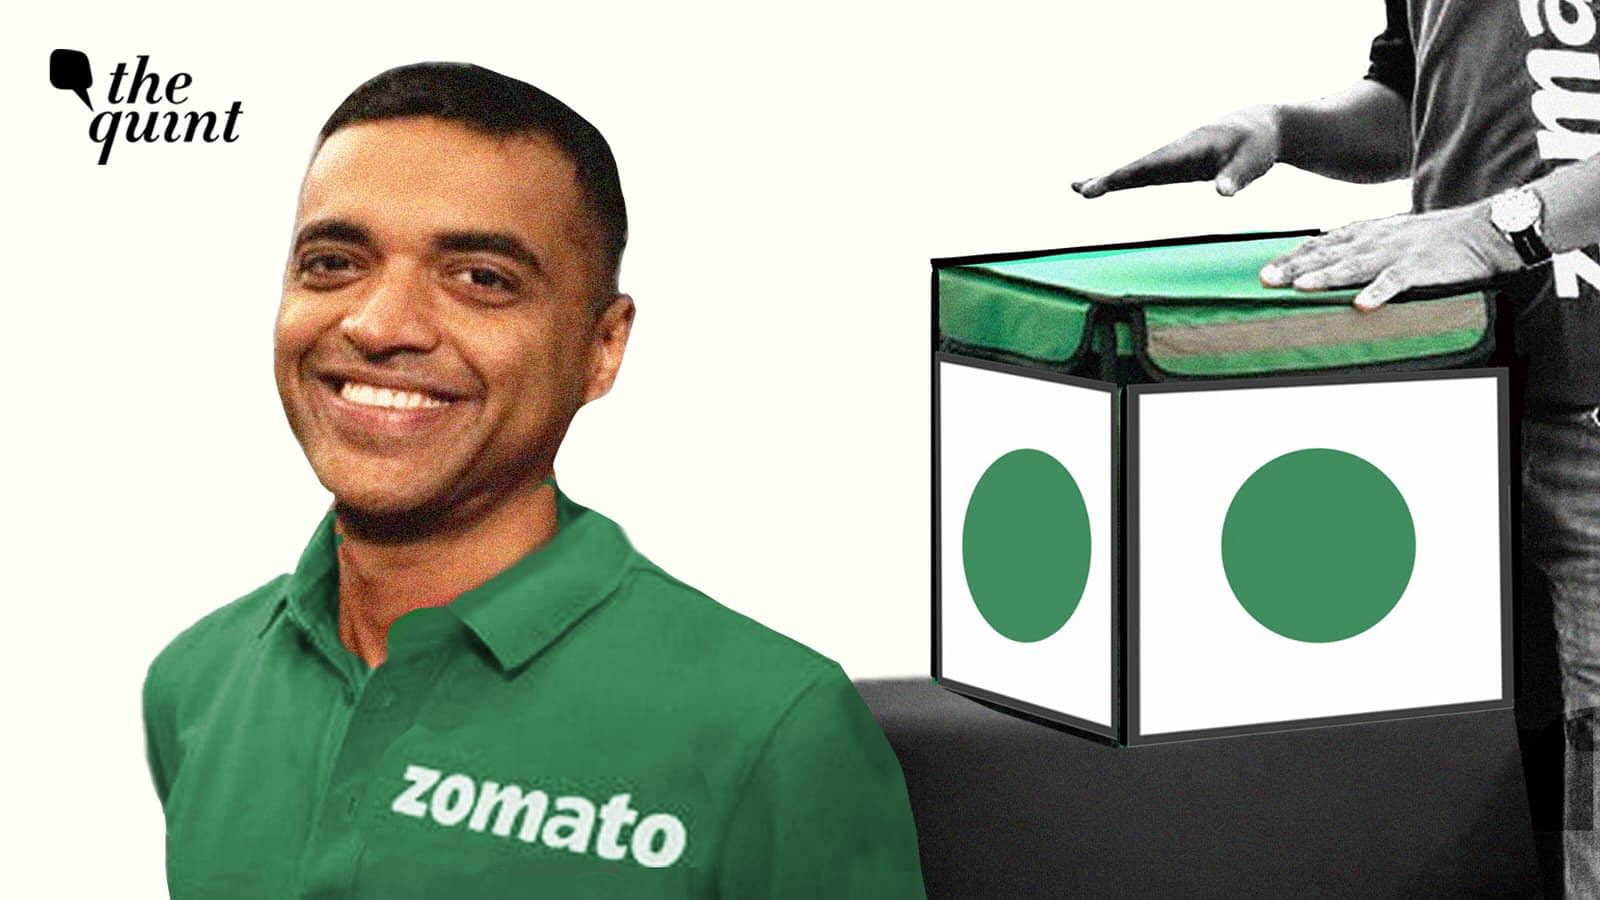 <div class="paragraphs"><p>the recent announcement by <a href="https://www.thequint.com/neon/social-buzz/zomatos-newly-launched-fleet-of-pure-veg-delivery-leaves-netizens-divided">Zomato</a> to launch a 'Pure Veg mode’ and 'Pure veg fleet’ for its vegetarian customers has triggered a hot debate, as to whether food habits in India are just harmless individual dietary preferences or they influence social relations and reinforce value-based tendencies of dominant communities by demarcating others.</p></div>